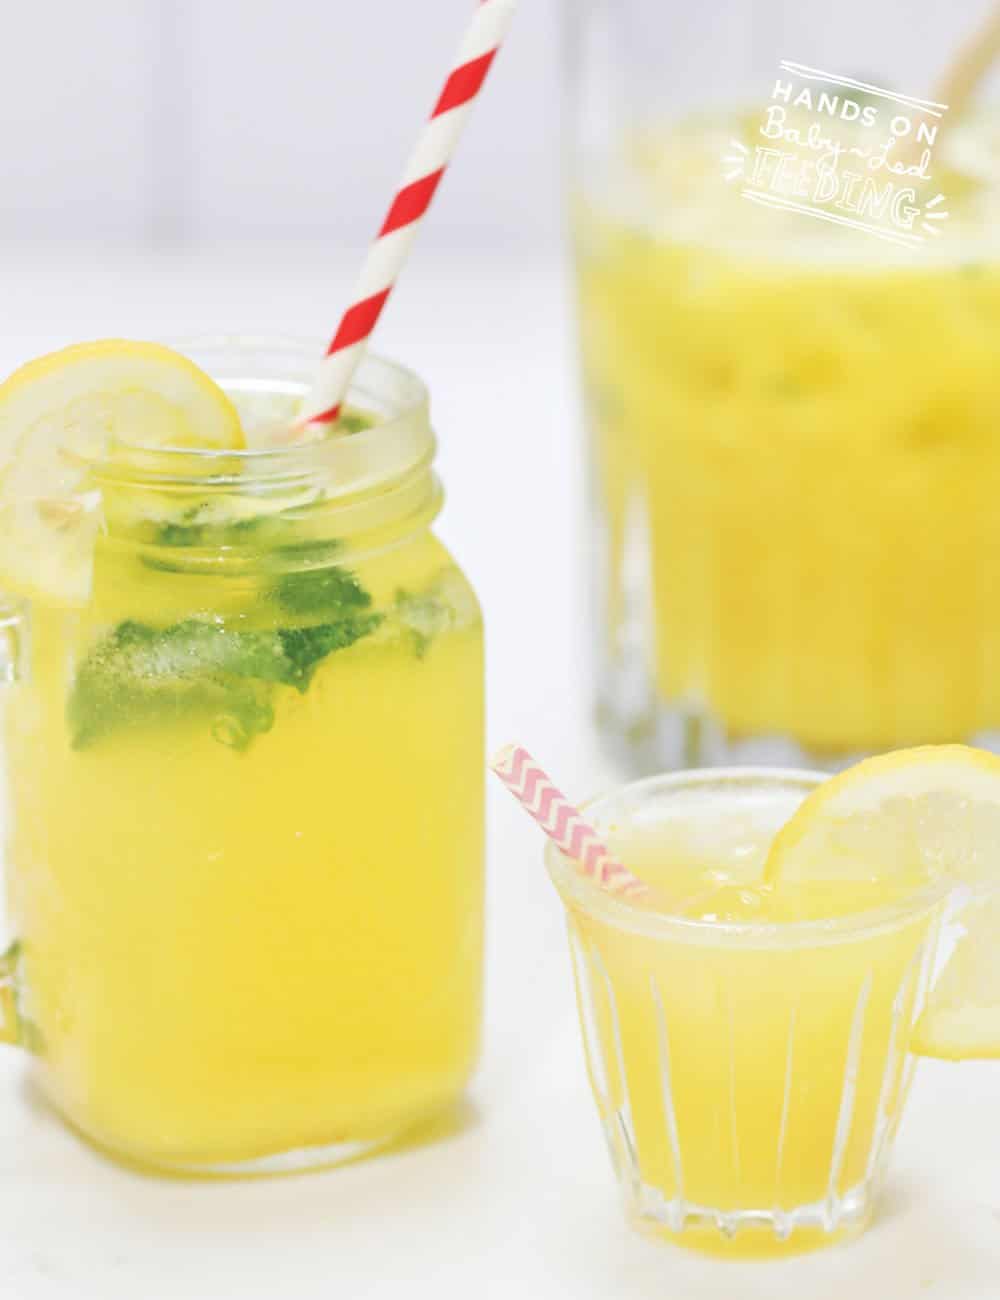 3 Ingredient Refined Sugar Free/ No Sugar Added Lemonade for Kids! Nothing says summer like lemonade but it's usually loaded with sugar, NOT THIS RECIPE! This refreshing sugar free lemonade is all natural and just as sweet tasting as other lemonades. #lemonade #summerdrinks #refinedsugarfree #noaddedsugar #kiddrinks #healthyjuice